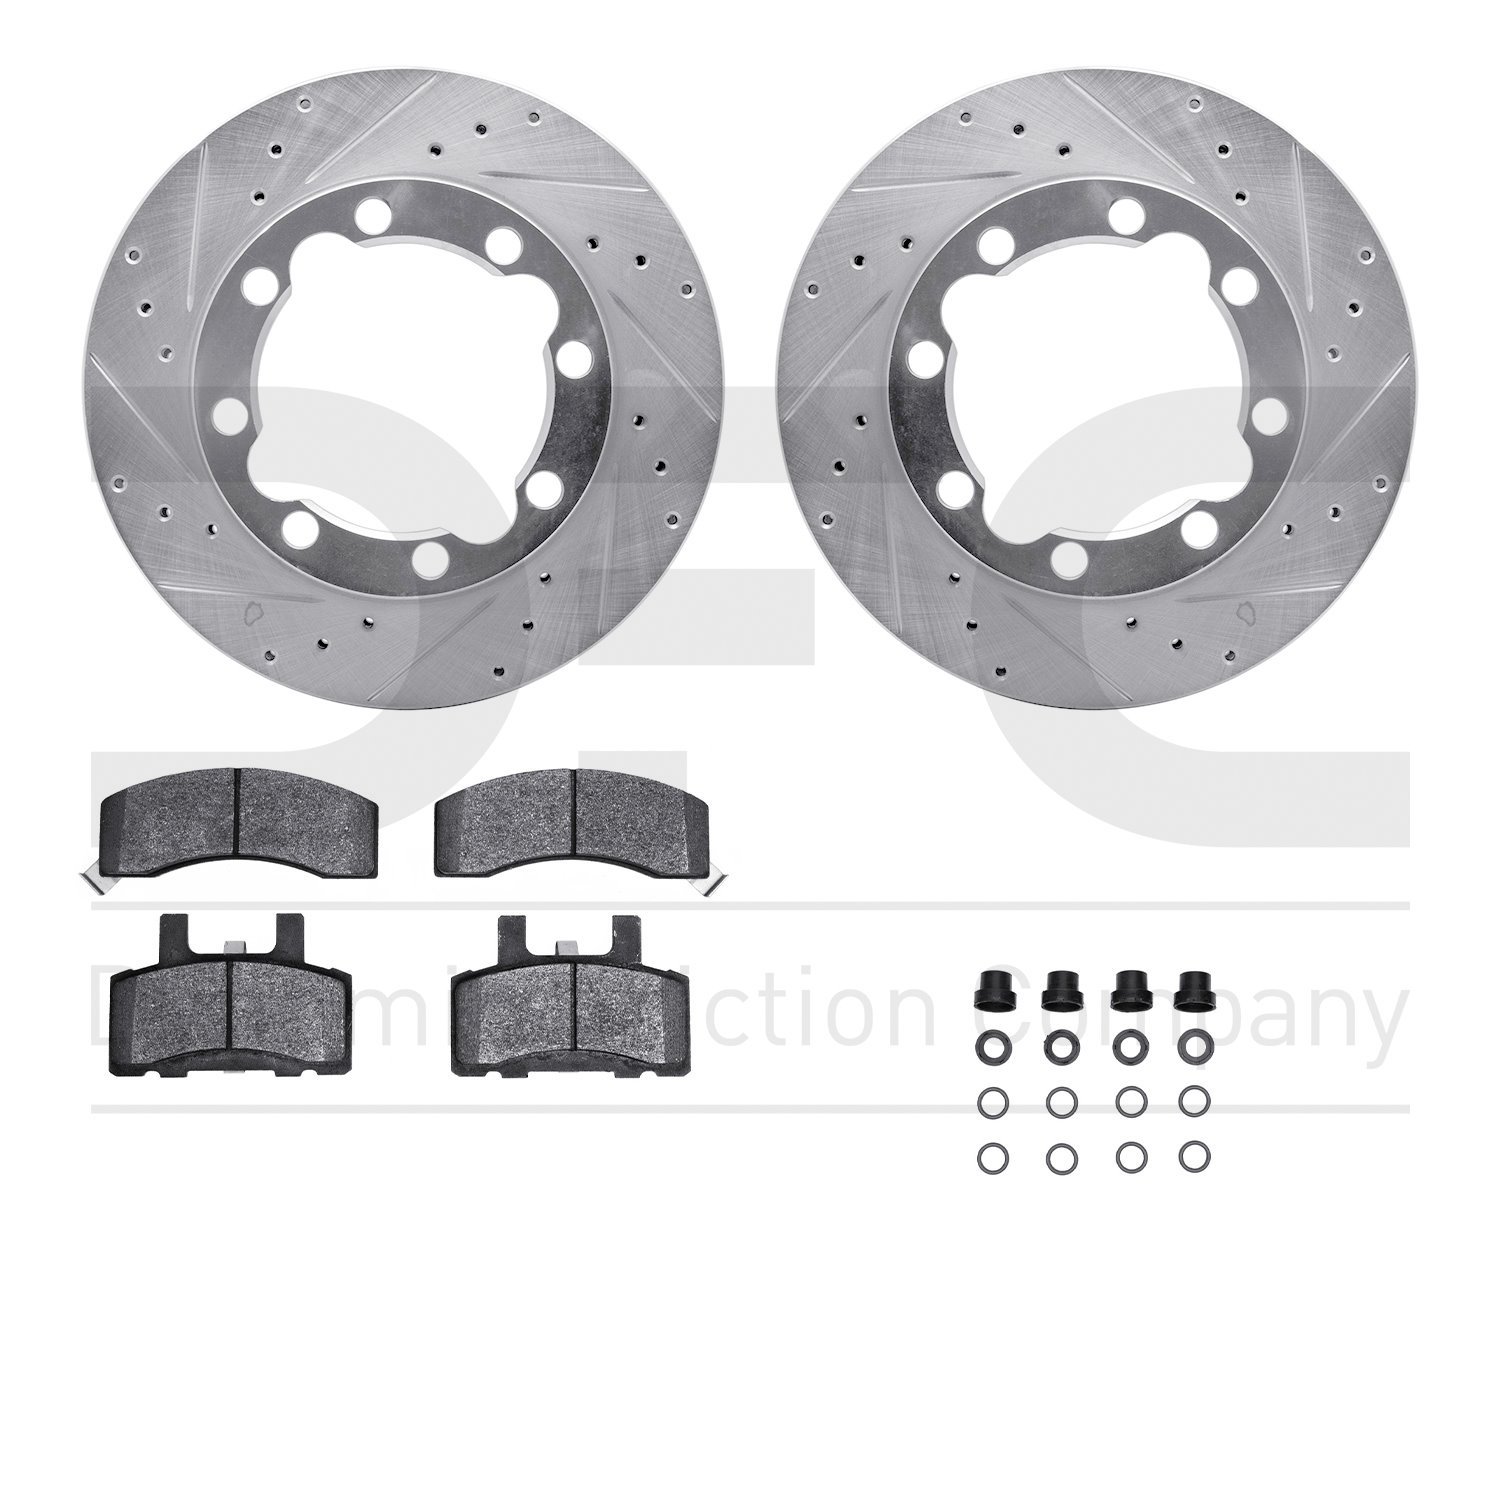 7412-40001 Drilled/Slotted Brake Rotors with Ultimate-Duty Brake Pads Kit & Hardware [Silver], 1988-2000 Multiple Makes/Models,